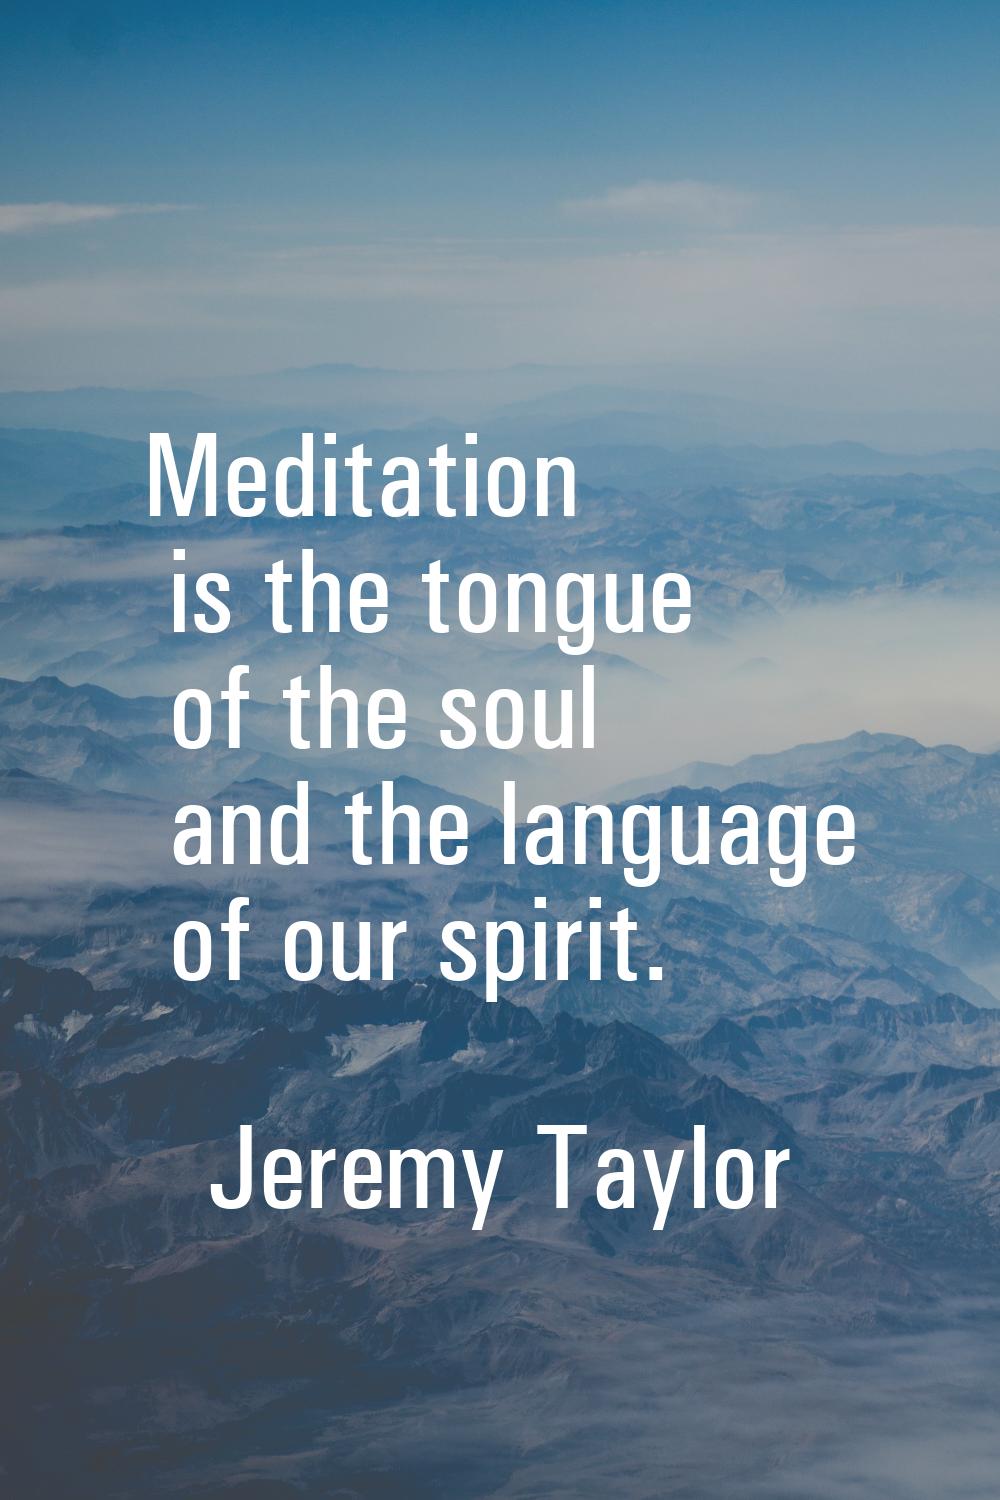 Meditation is the tongue of the soul and the language of our spirit.